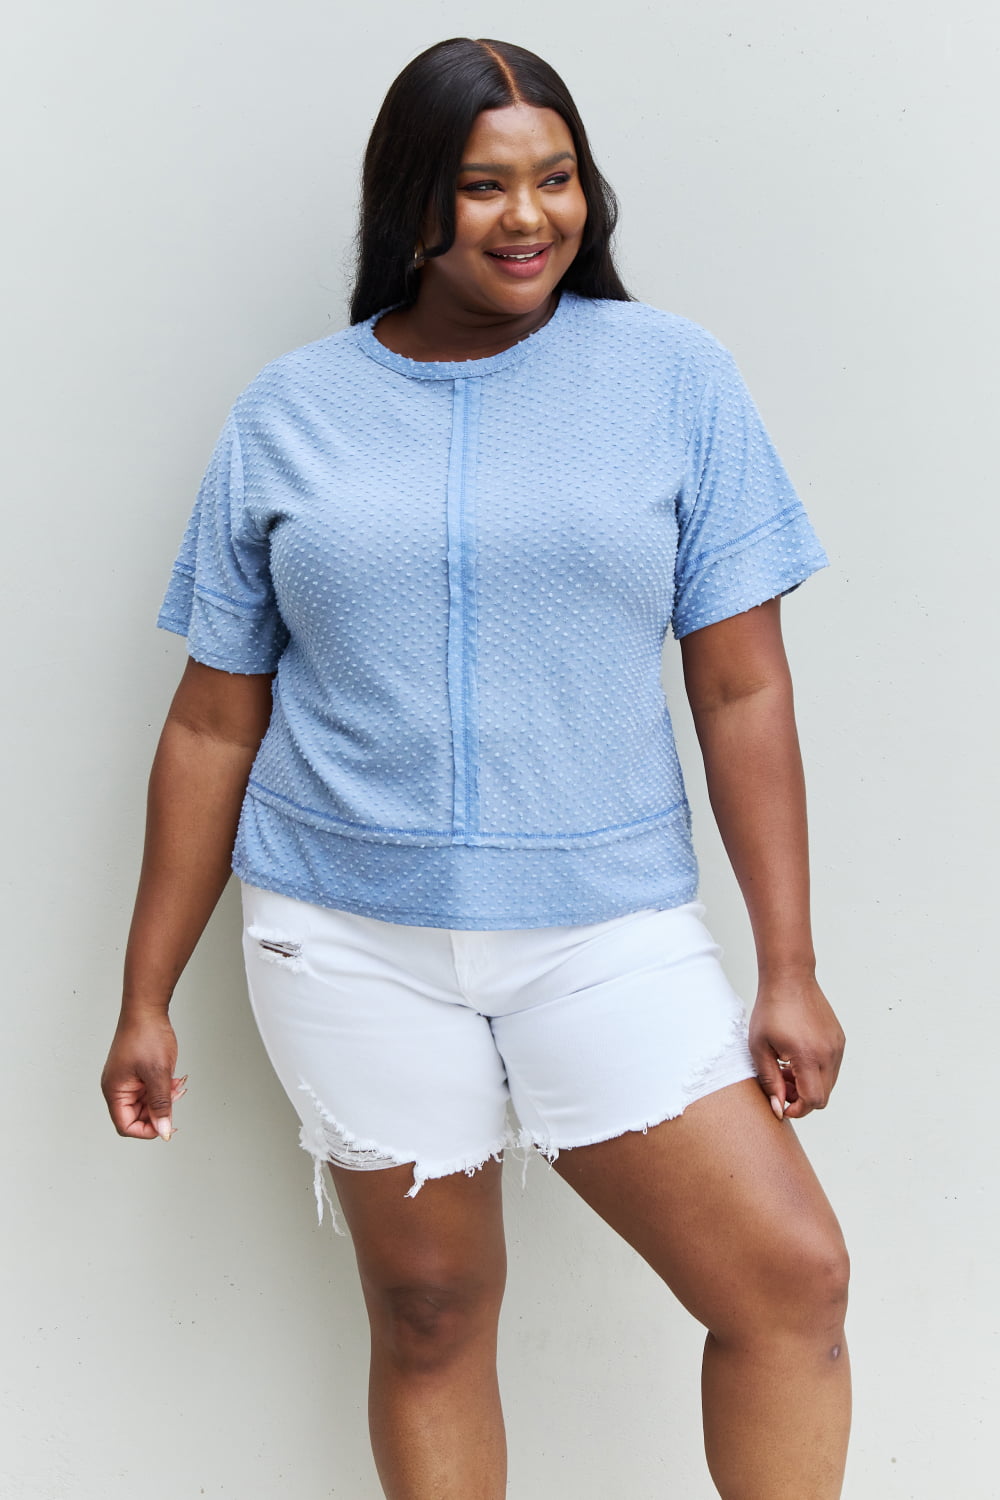 HOPELY Cater 2 You Swiss Dot Reverse Stitch Short Sleeve Top - Online Only